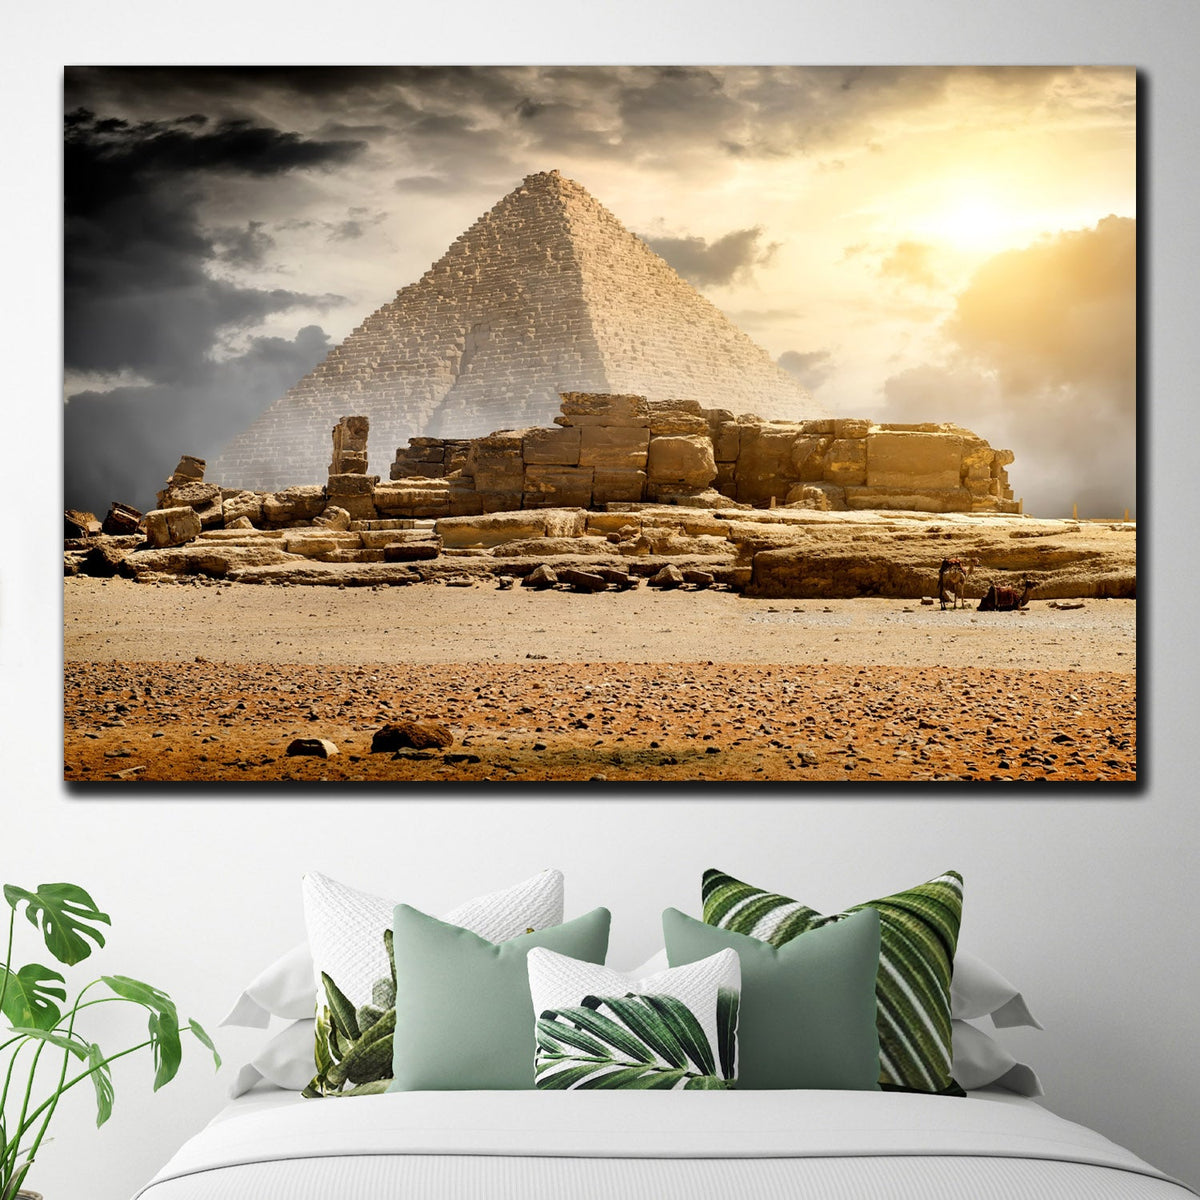 https://cdn.shopify.com/s/files/1/0387/9986/8044/products/MysteriousEgyptCanvasArtprintStretched-2.jpg